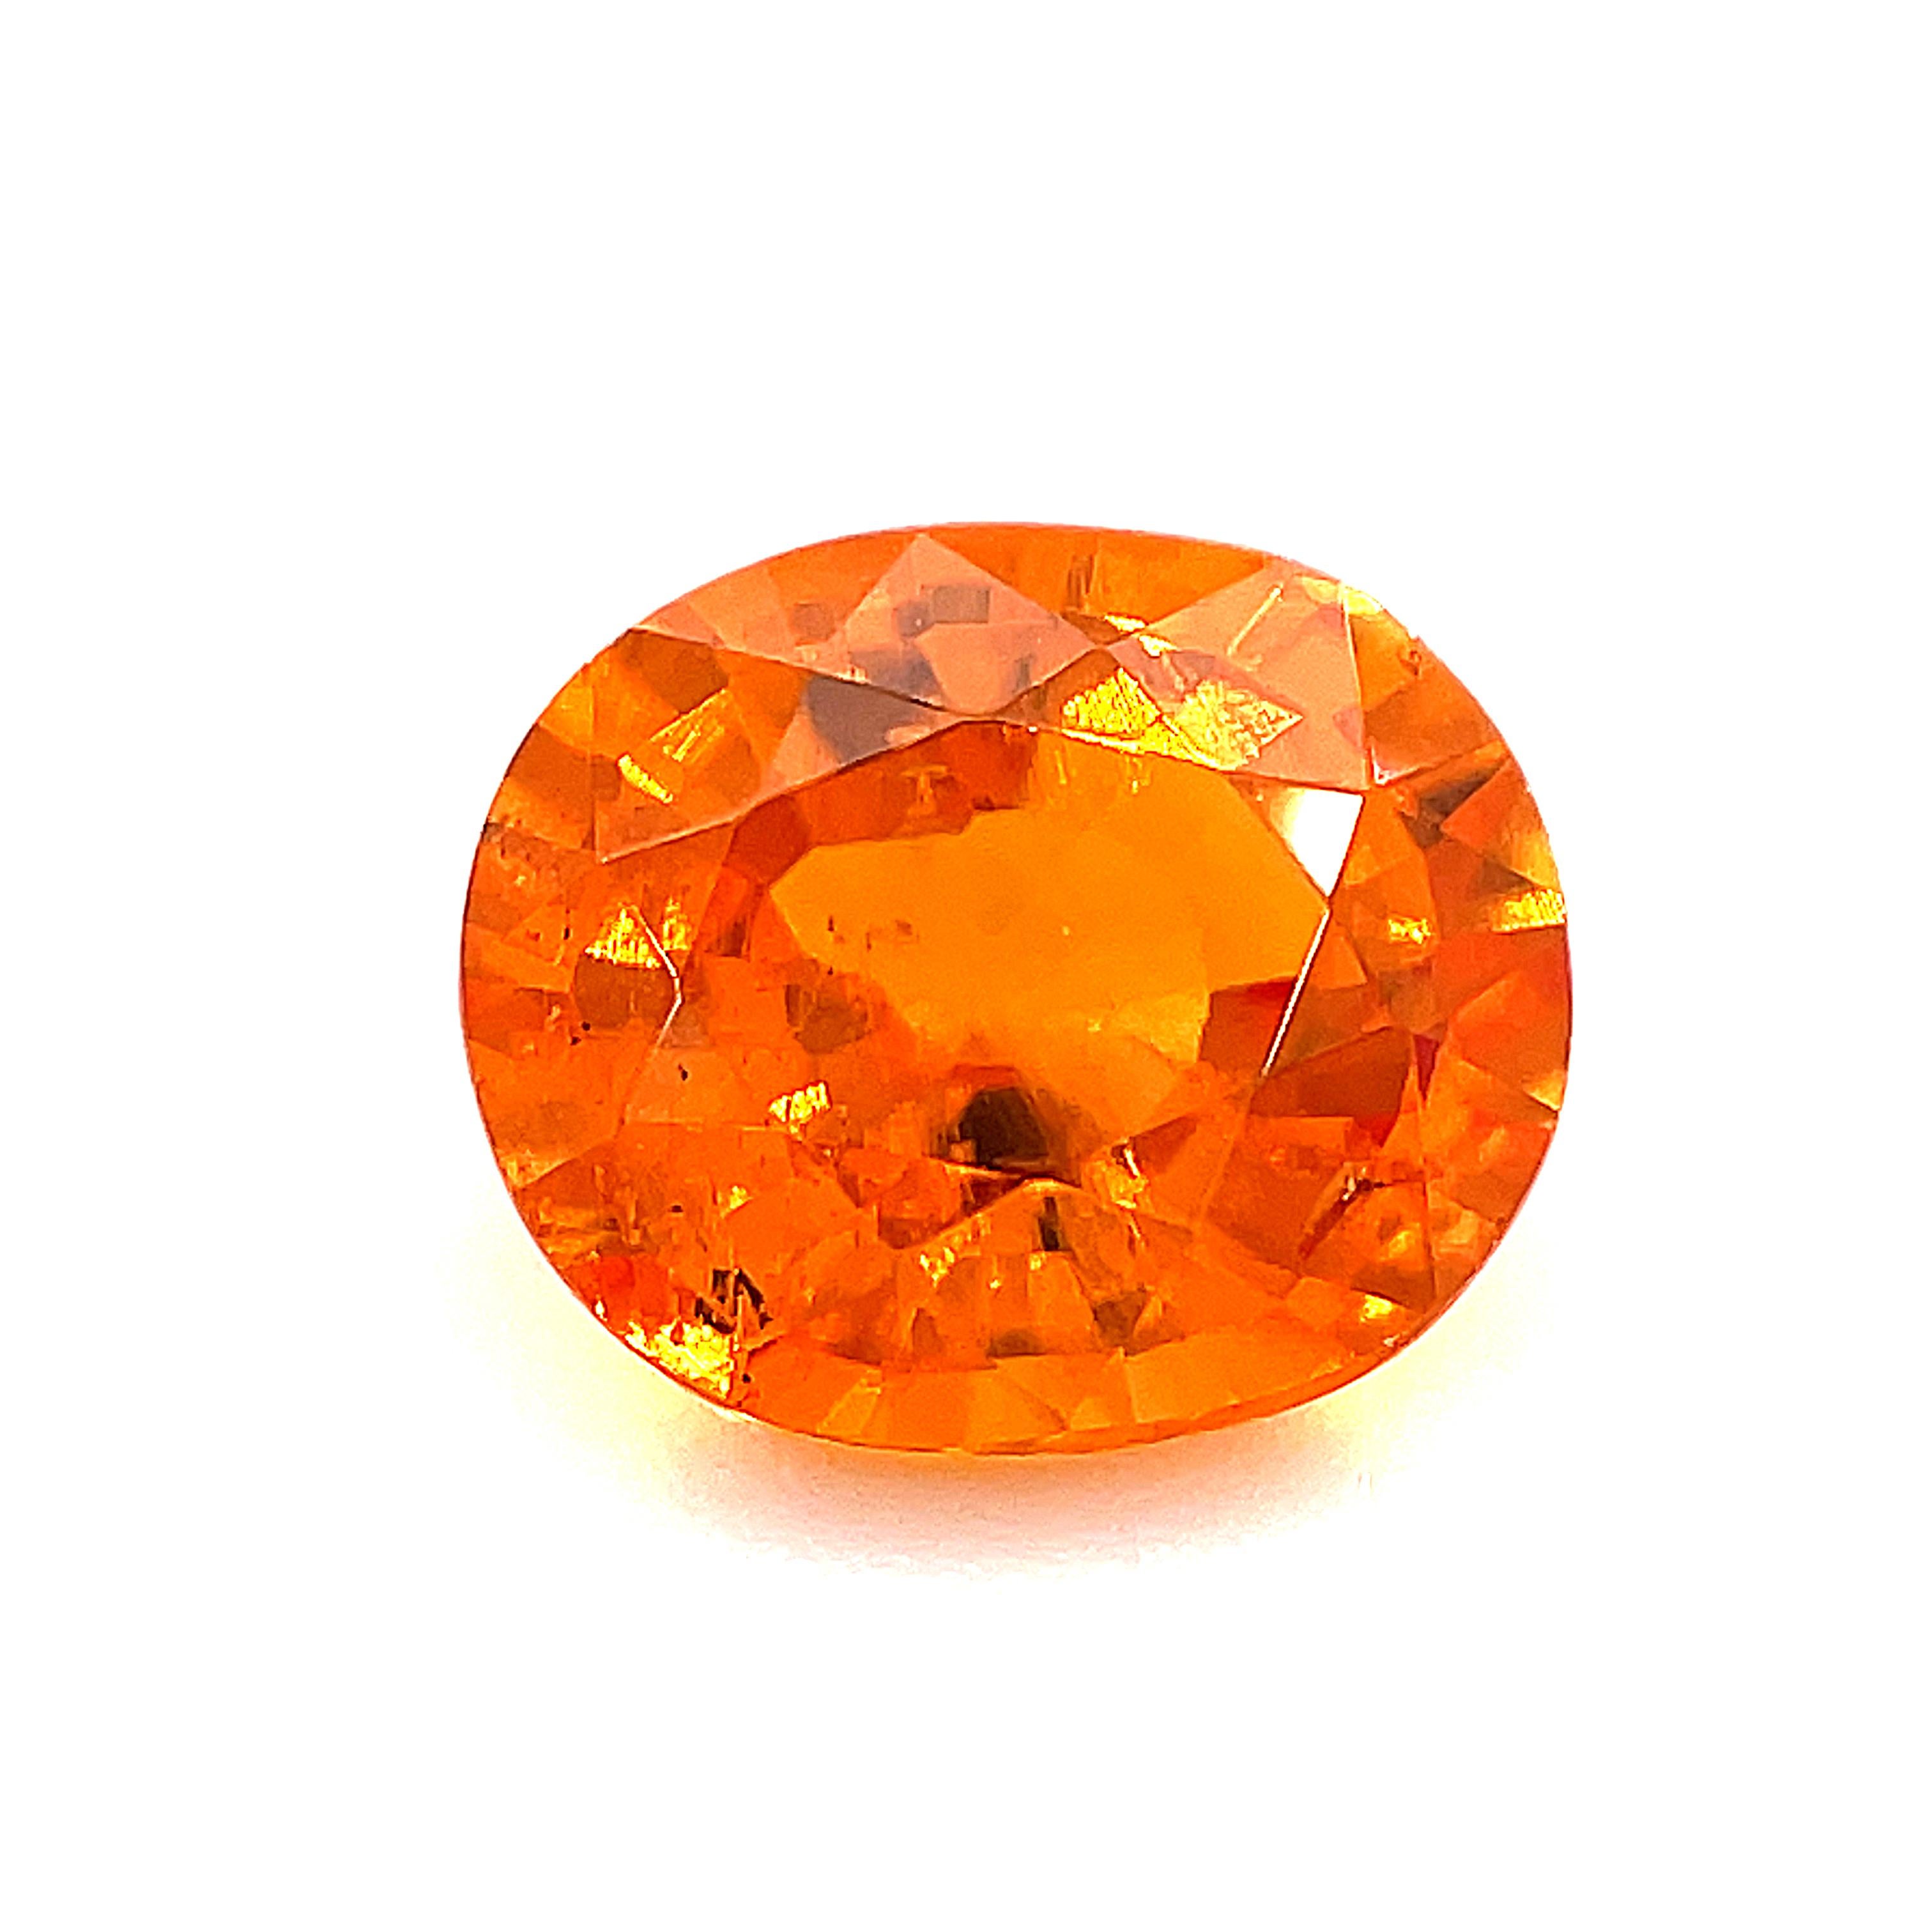 This brilliant spessartite garnet has a beautiful electric orange color! Measuring 8.26 x 7.14 x 4.65 millimeters, it is a nicely proportioned oval and would make a beautiful ring or pendant. It is the vibrant orange color of a Mandarin orange or